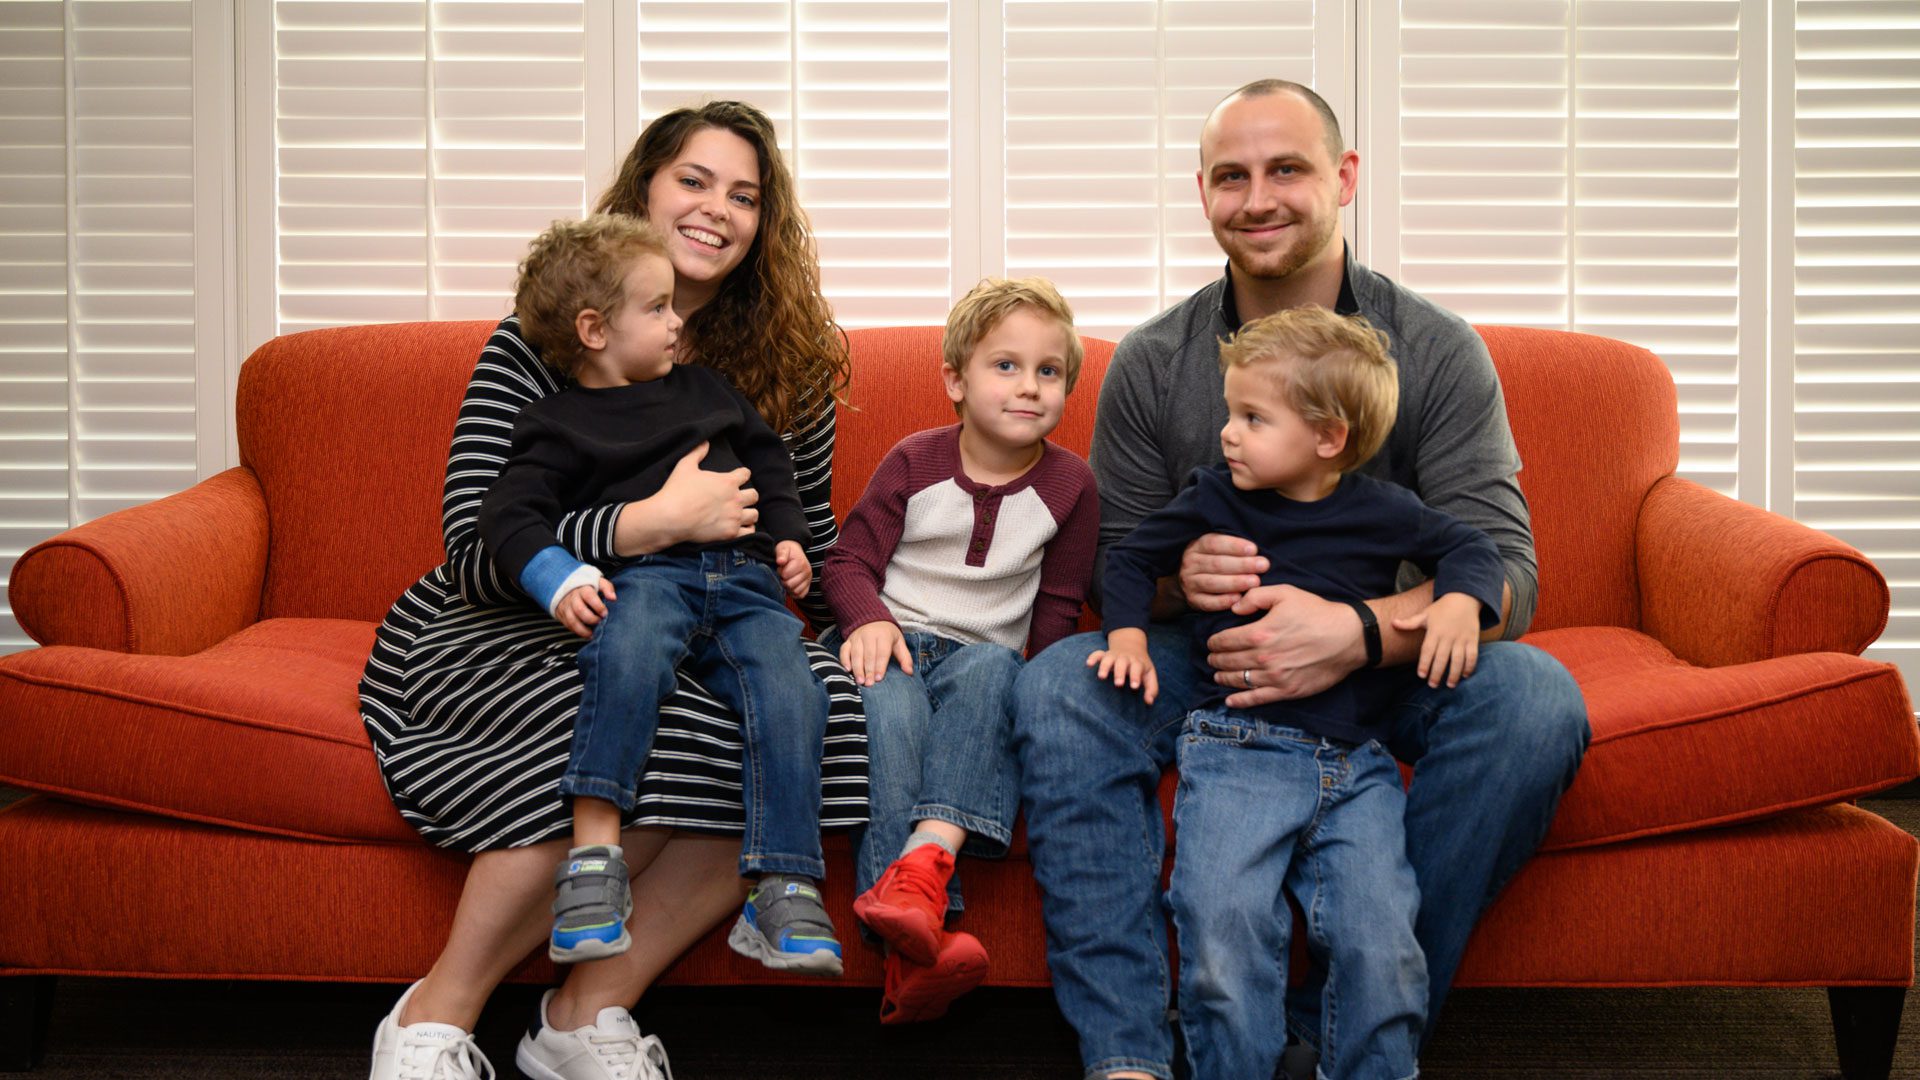 The Creech Family, one of the 3,181 families served through our Ronald McDonald House Charities programs in 2022.